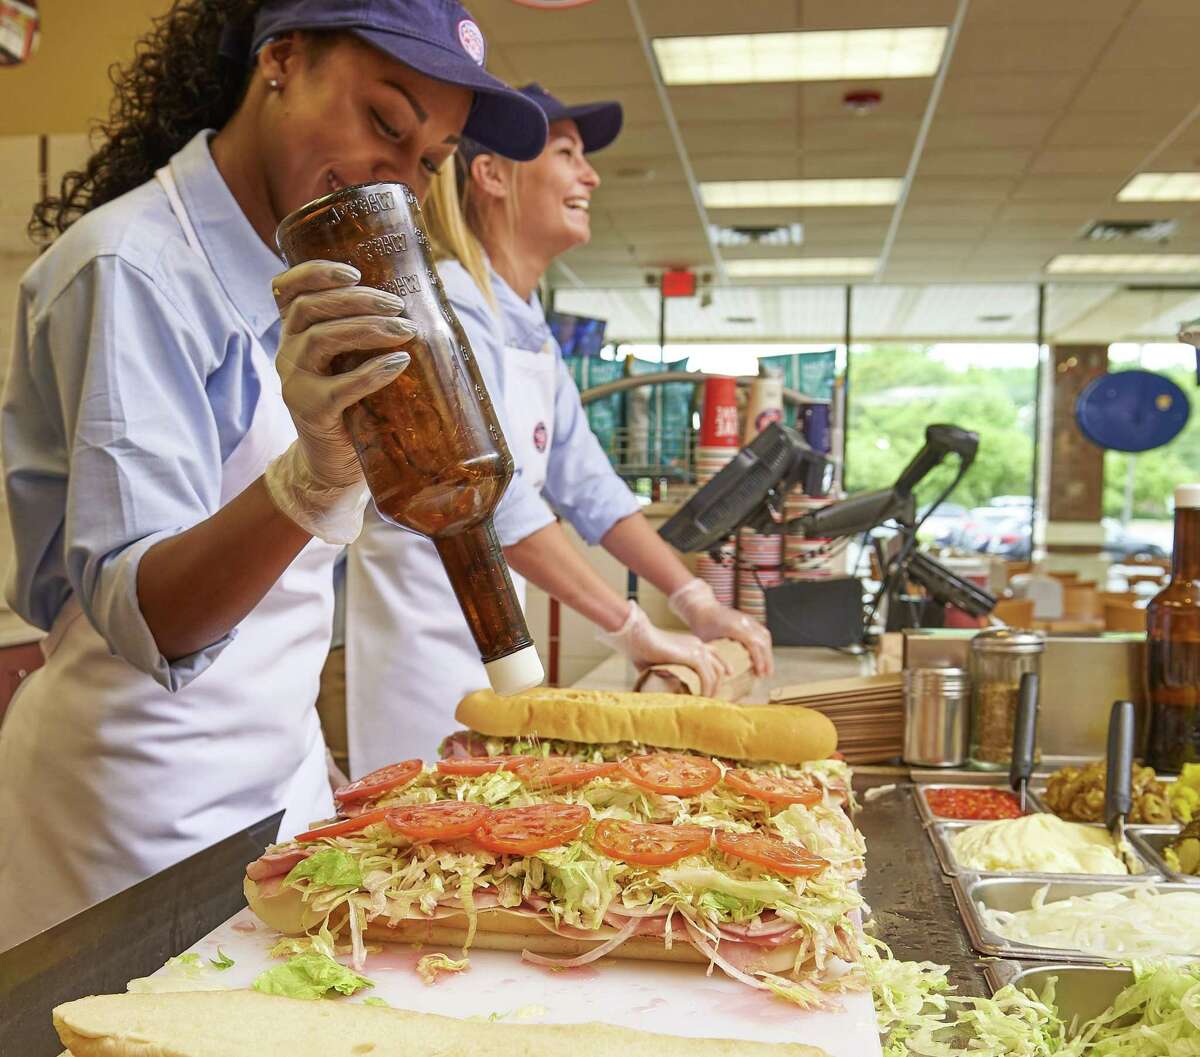 Workers make subs at a Jersey Mike’s shop in Holmdel, N.J. A Jersey Mike’s shop is scheduled to open in the summer of 2019 at 1259 E. Putnam Ave., in Greenwich, Conn.